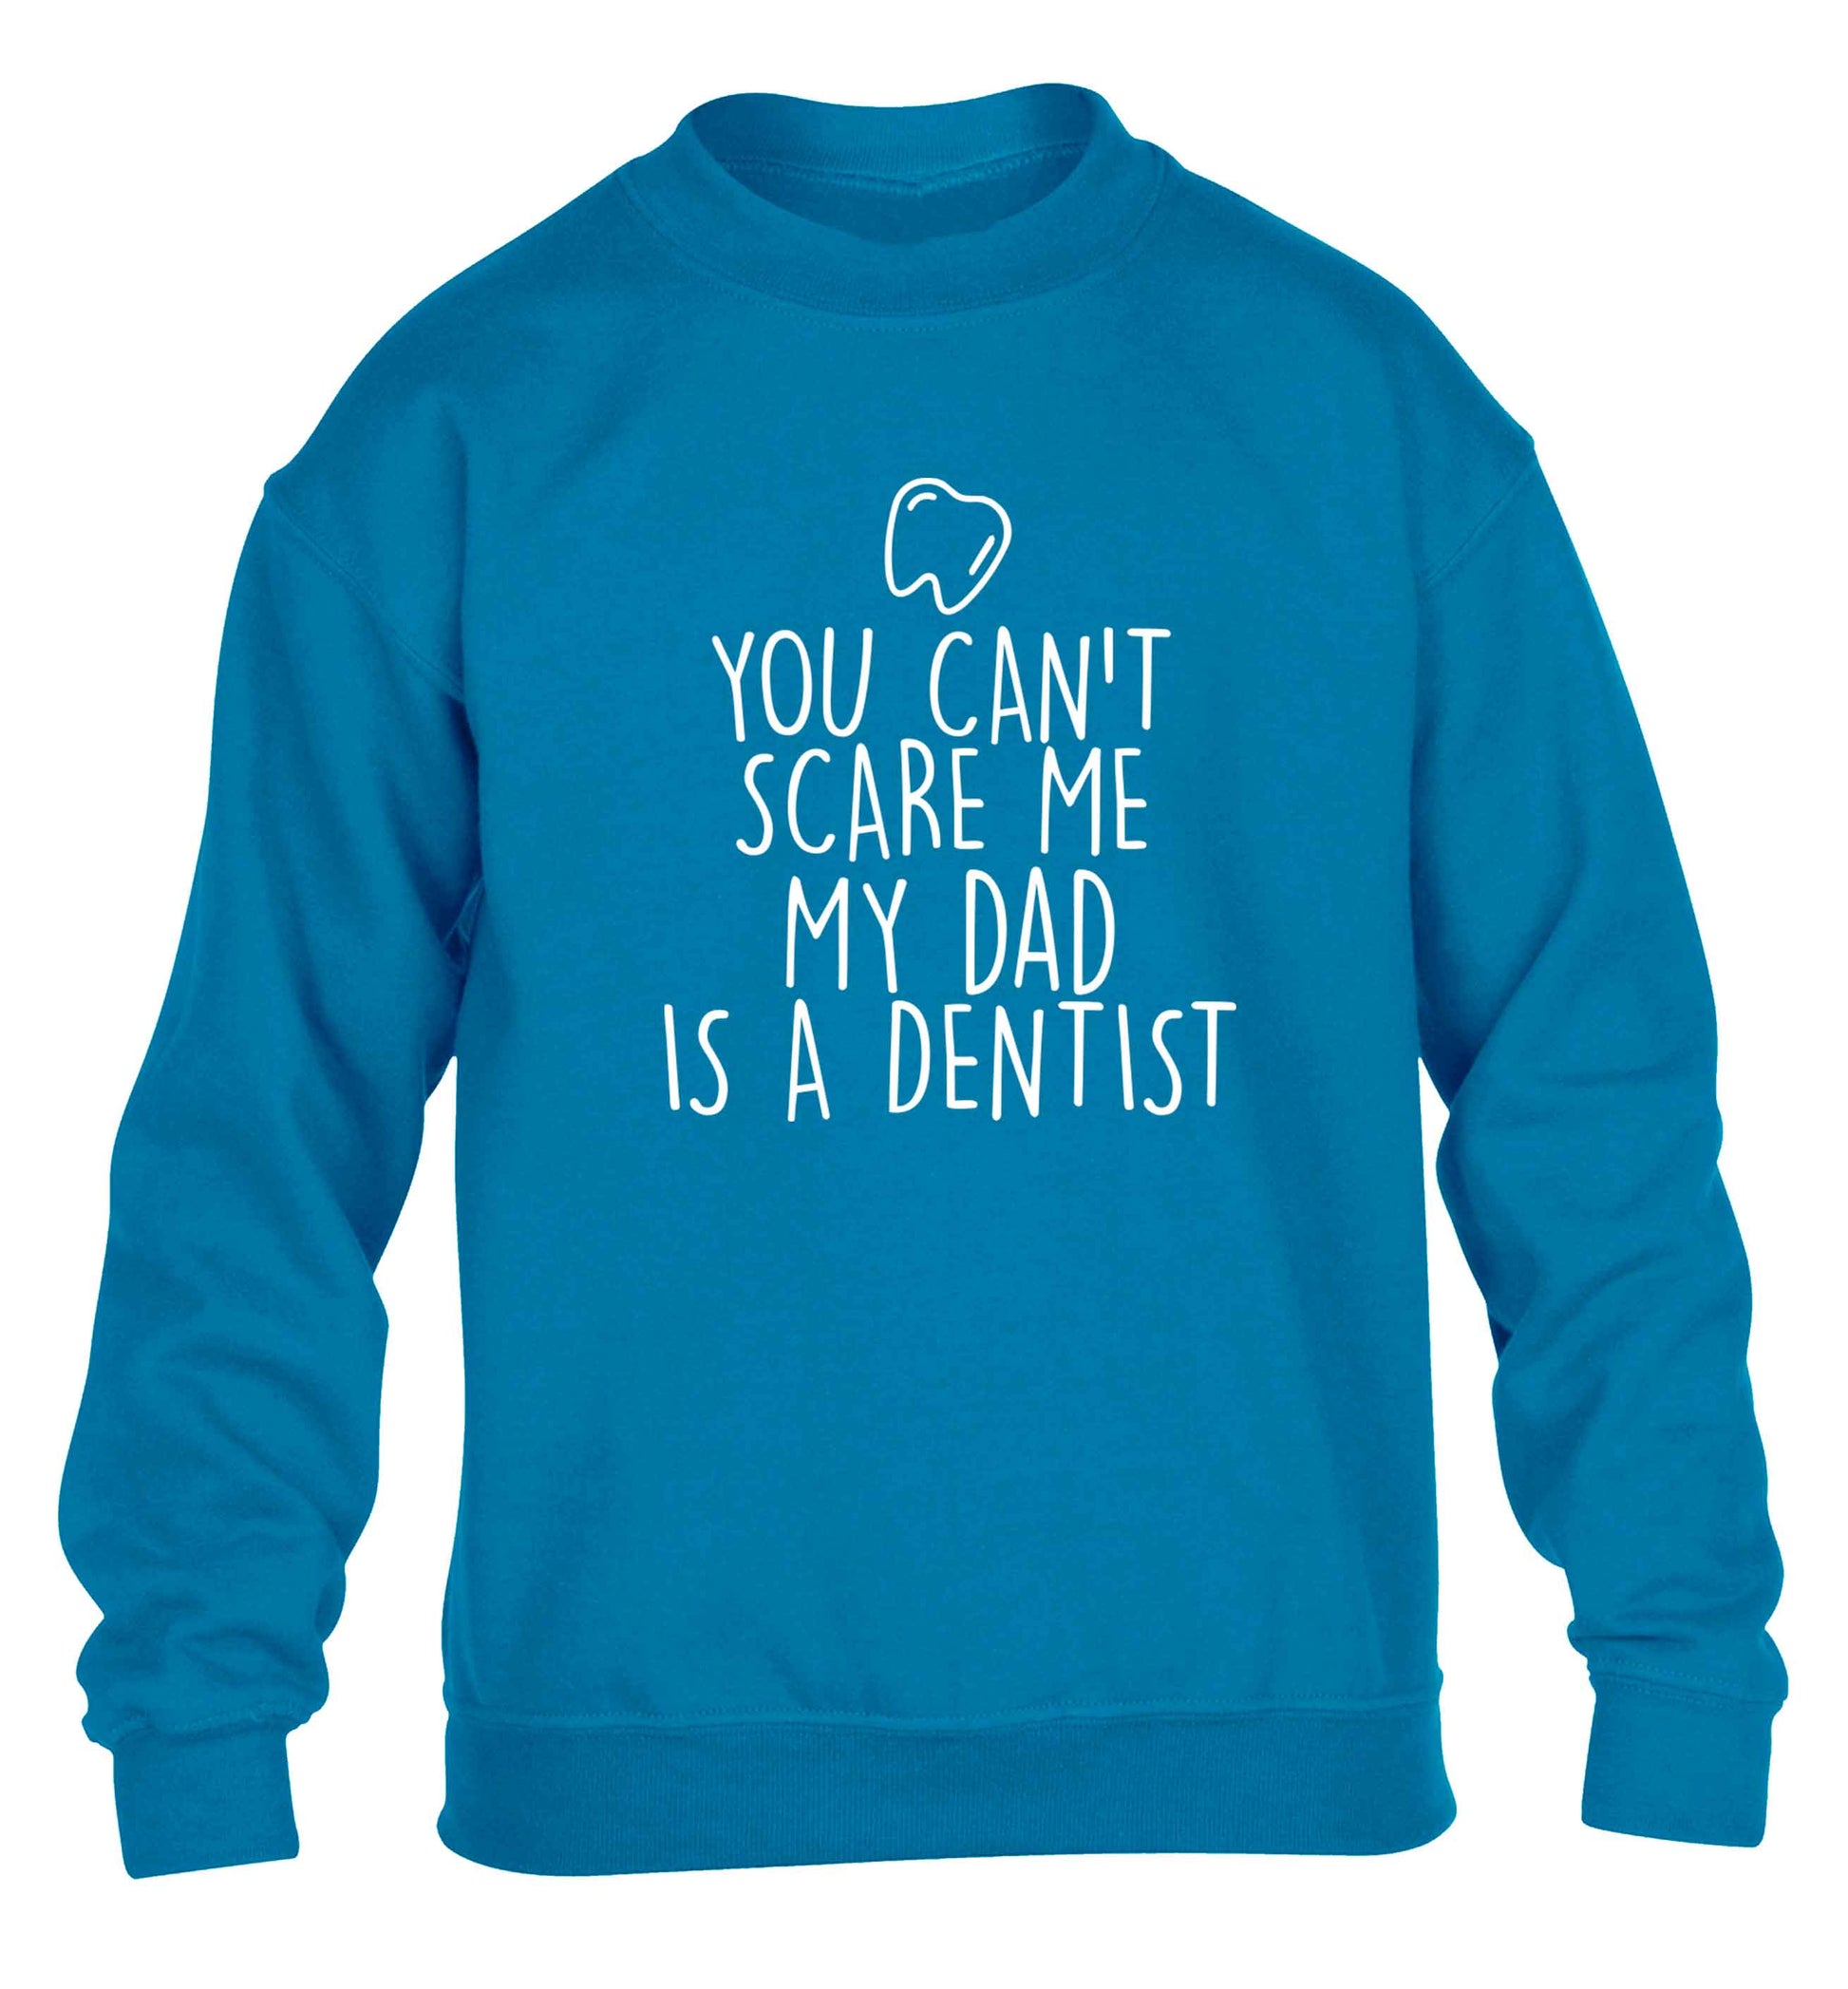 You can't scare me my dad is a dentist children's blue sweater 12-13 Years